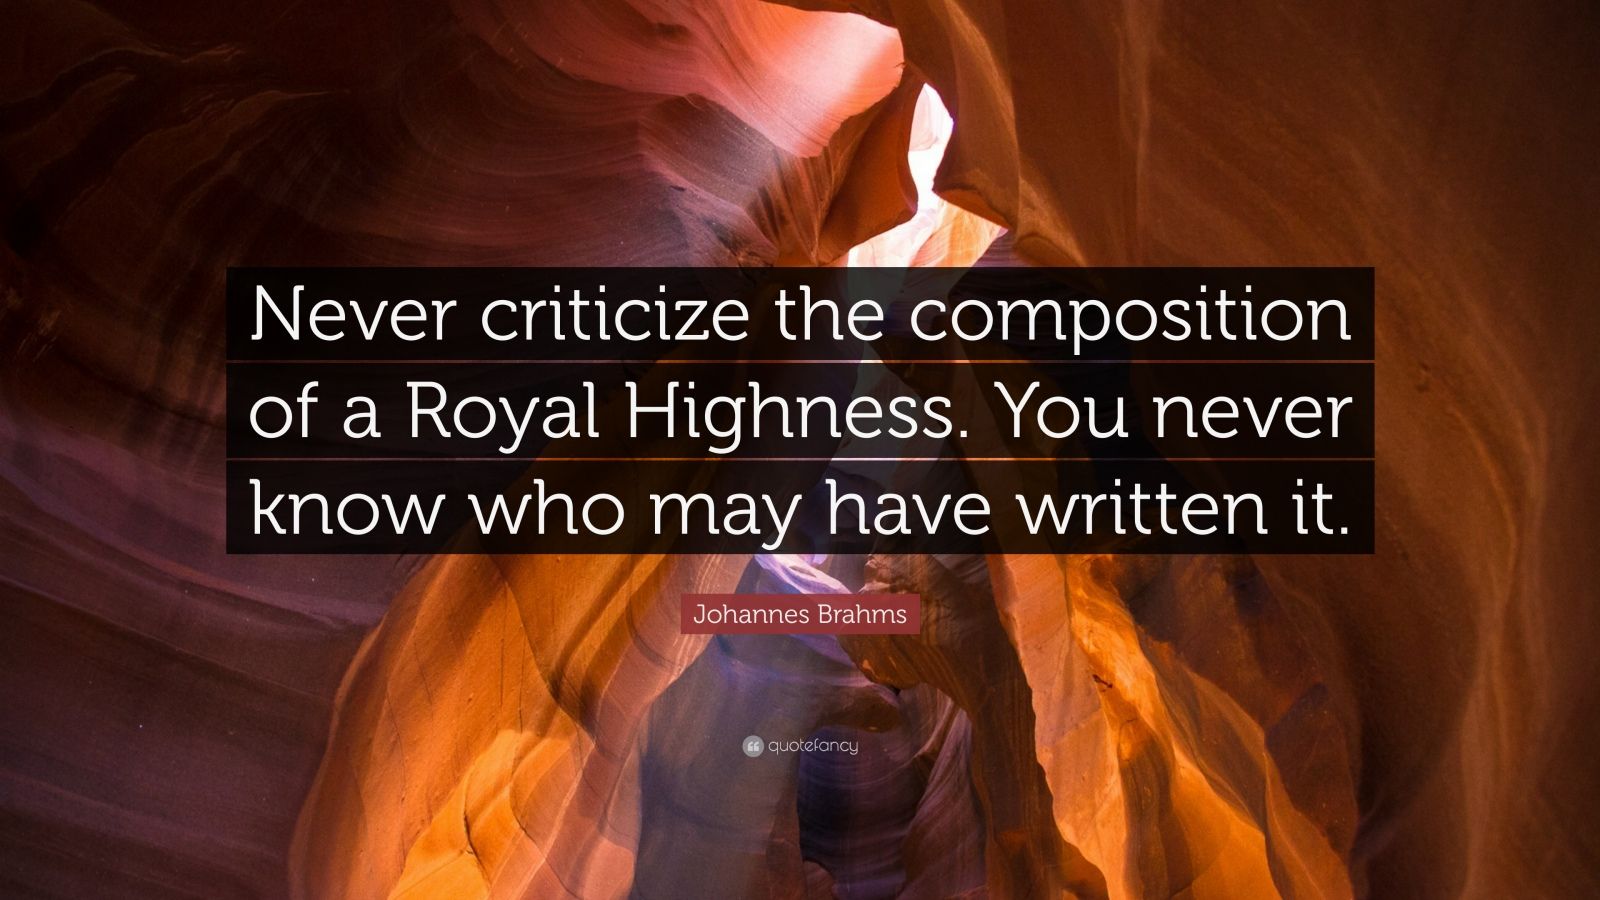 Johannes Brahms Quote: "Never criticize the composition of a Royal Highness. You never know who ...